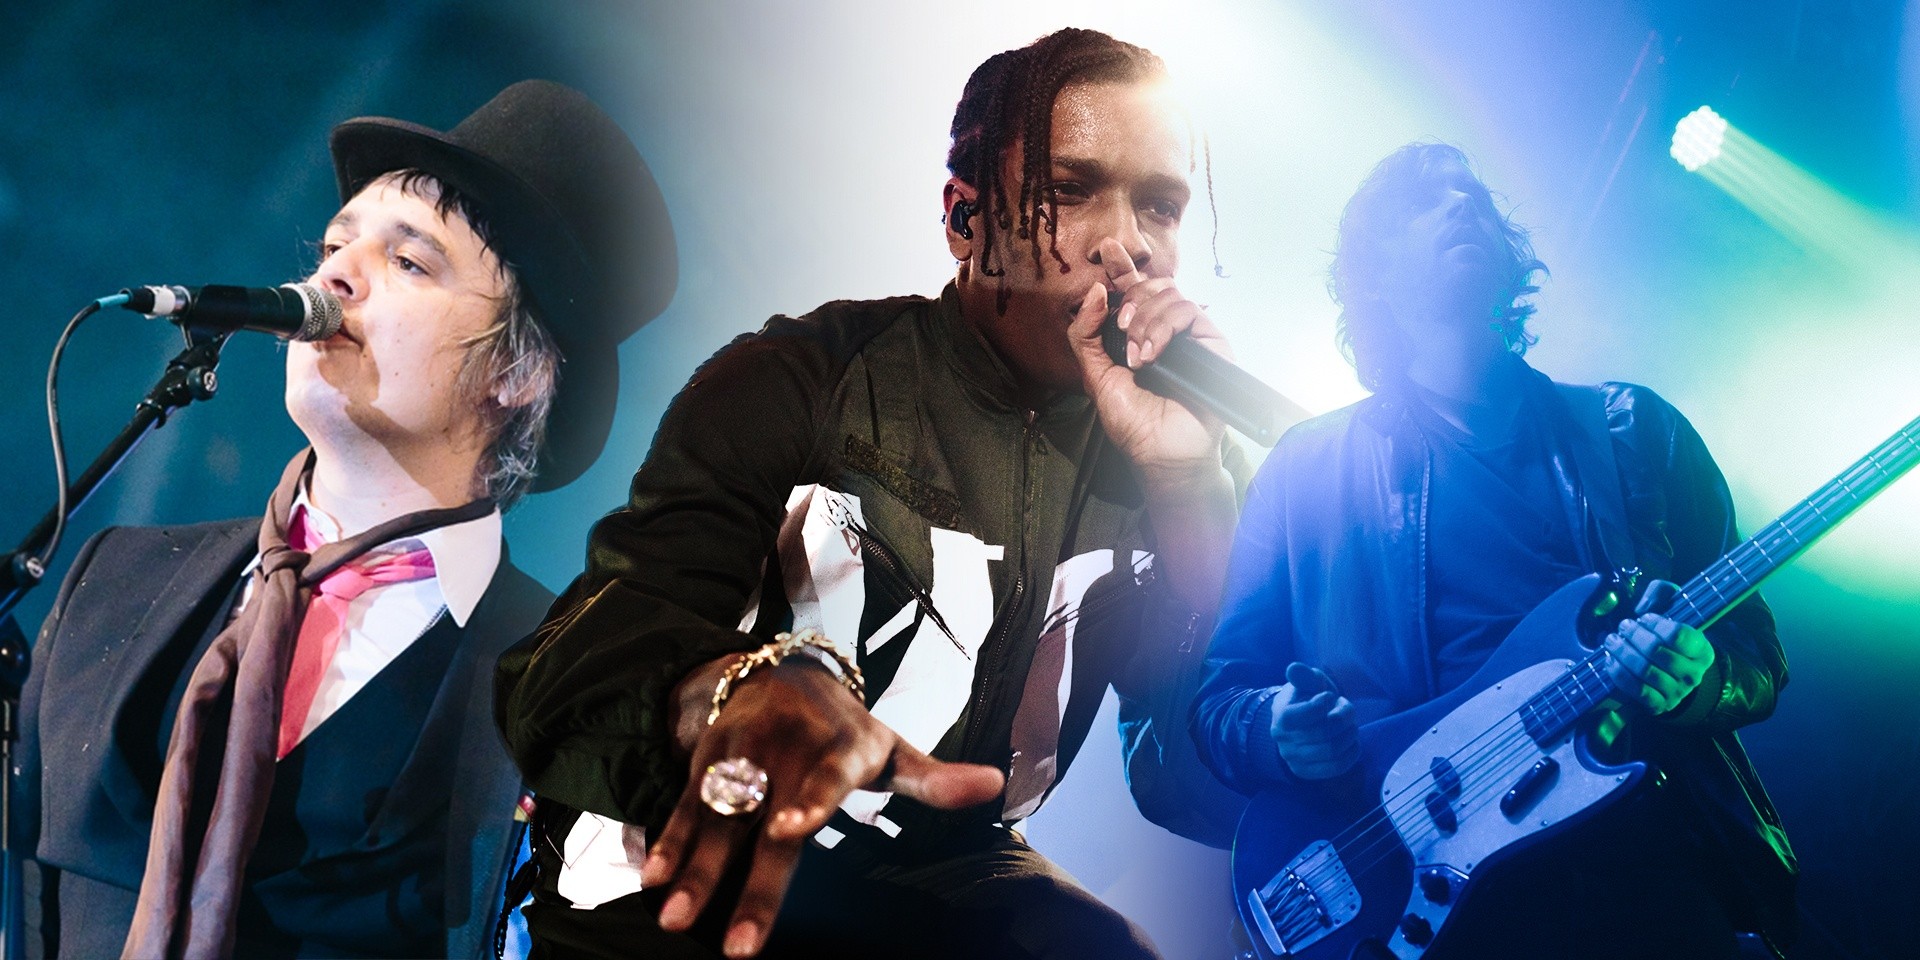 PHOTO GALLERY: Clockenflap 2015 Day 2 — The Libertines, A$AP Rocky, Ratatat, Angel Haze & More 